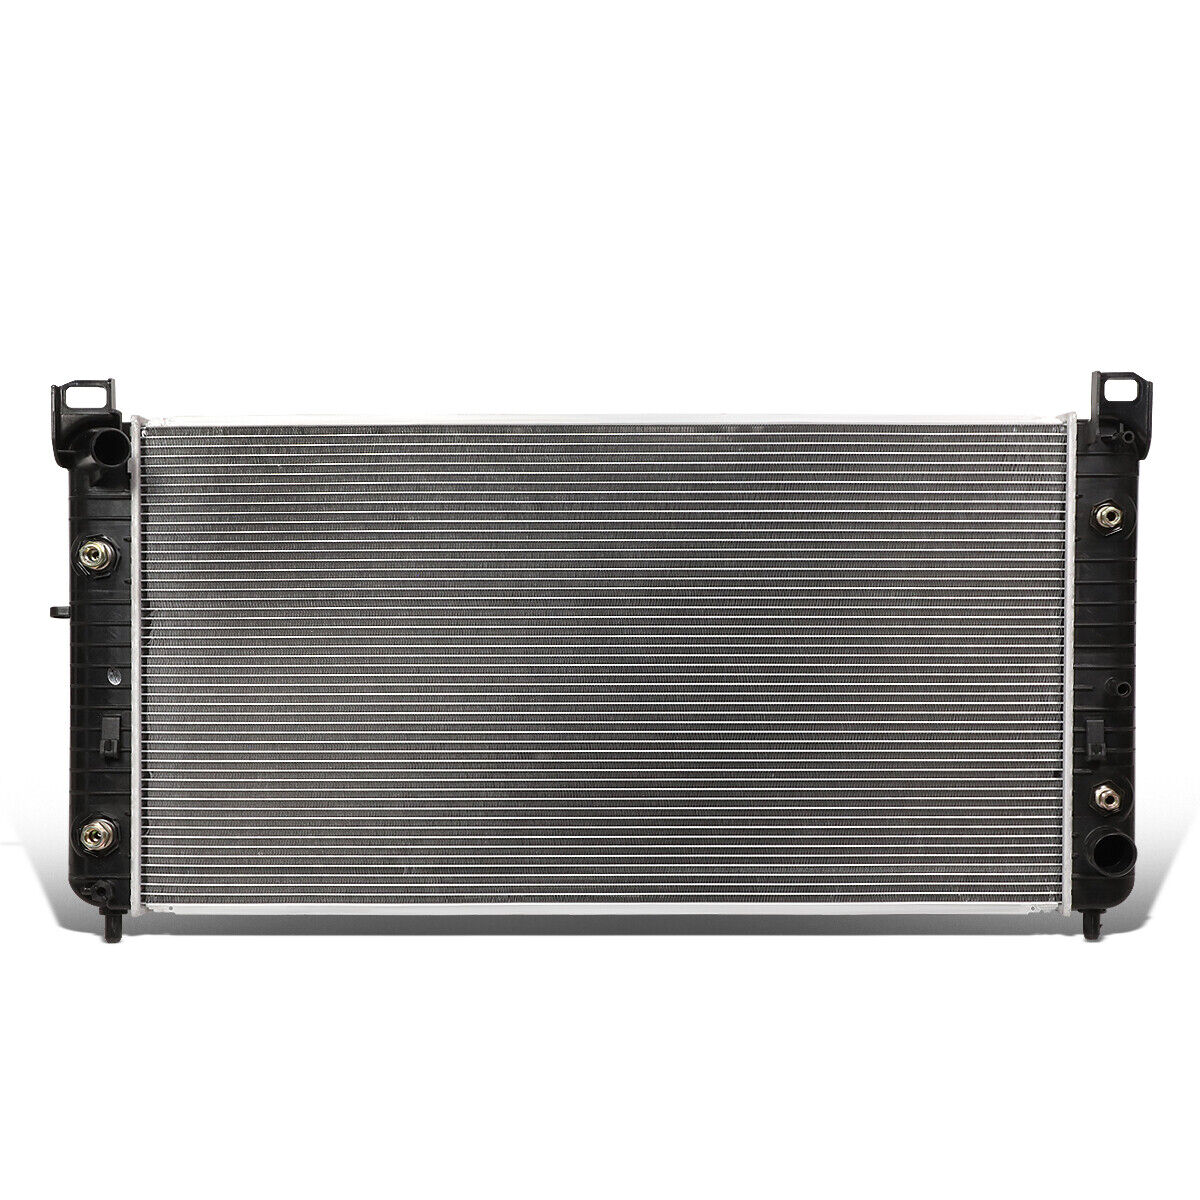 Radiator Fits For 2001-2002 Chevy Silverado 2500 3500 8.1L AT